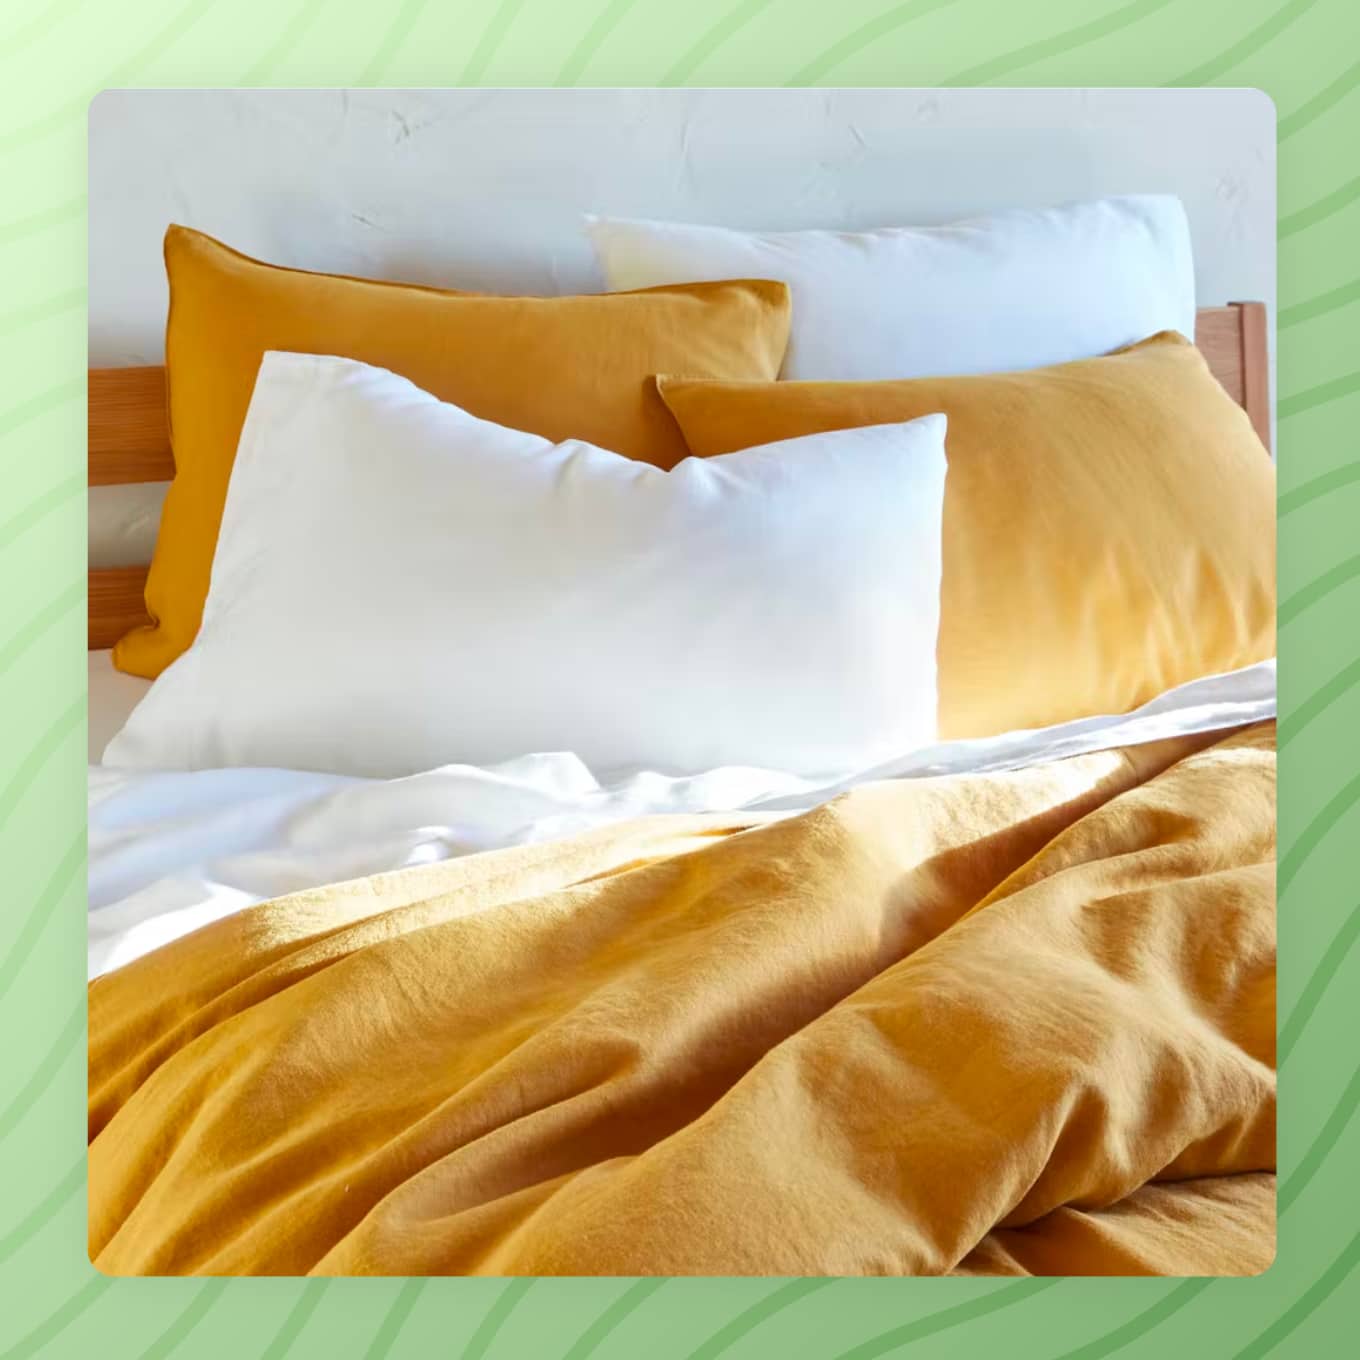 A bed with yellow and white bedding